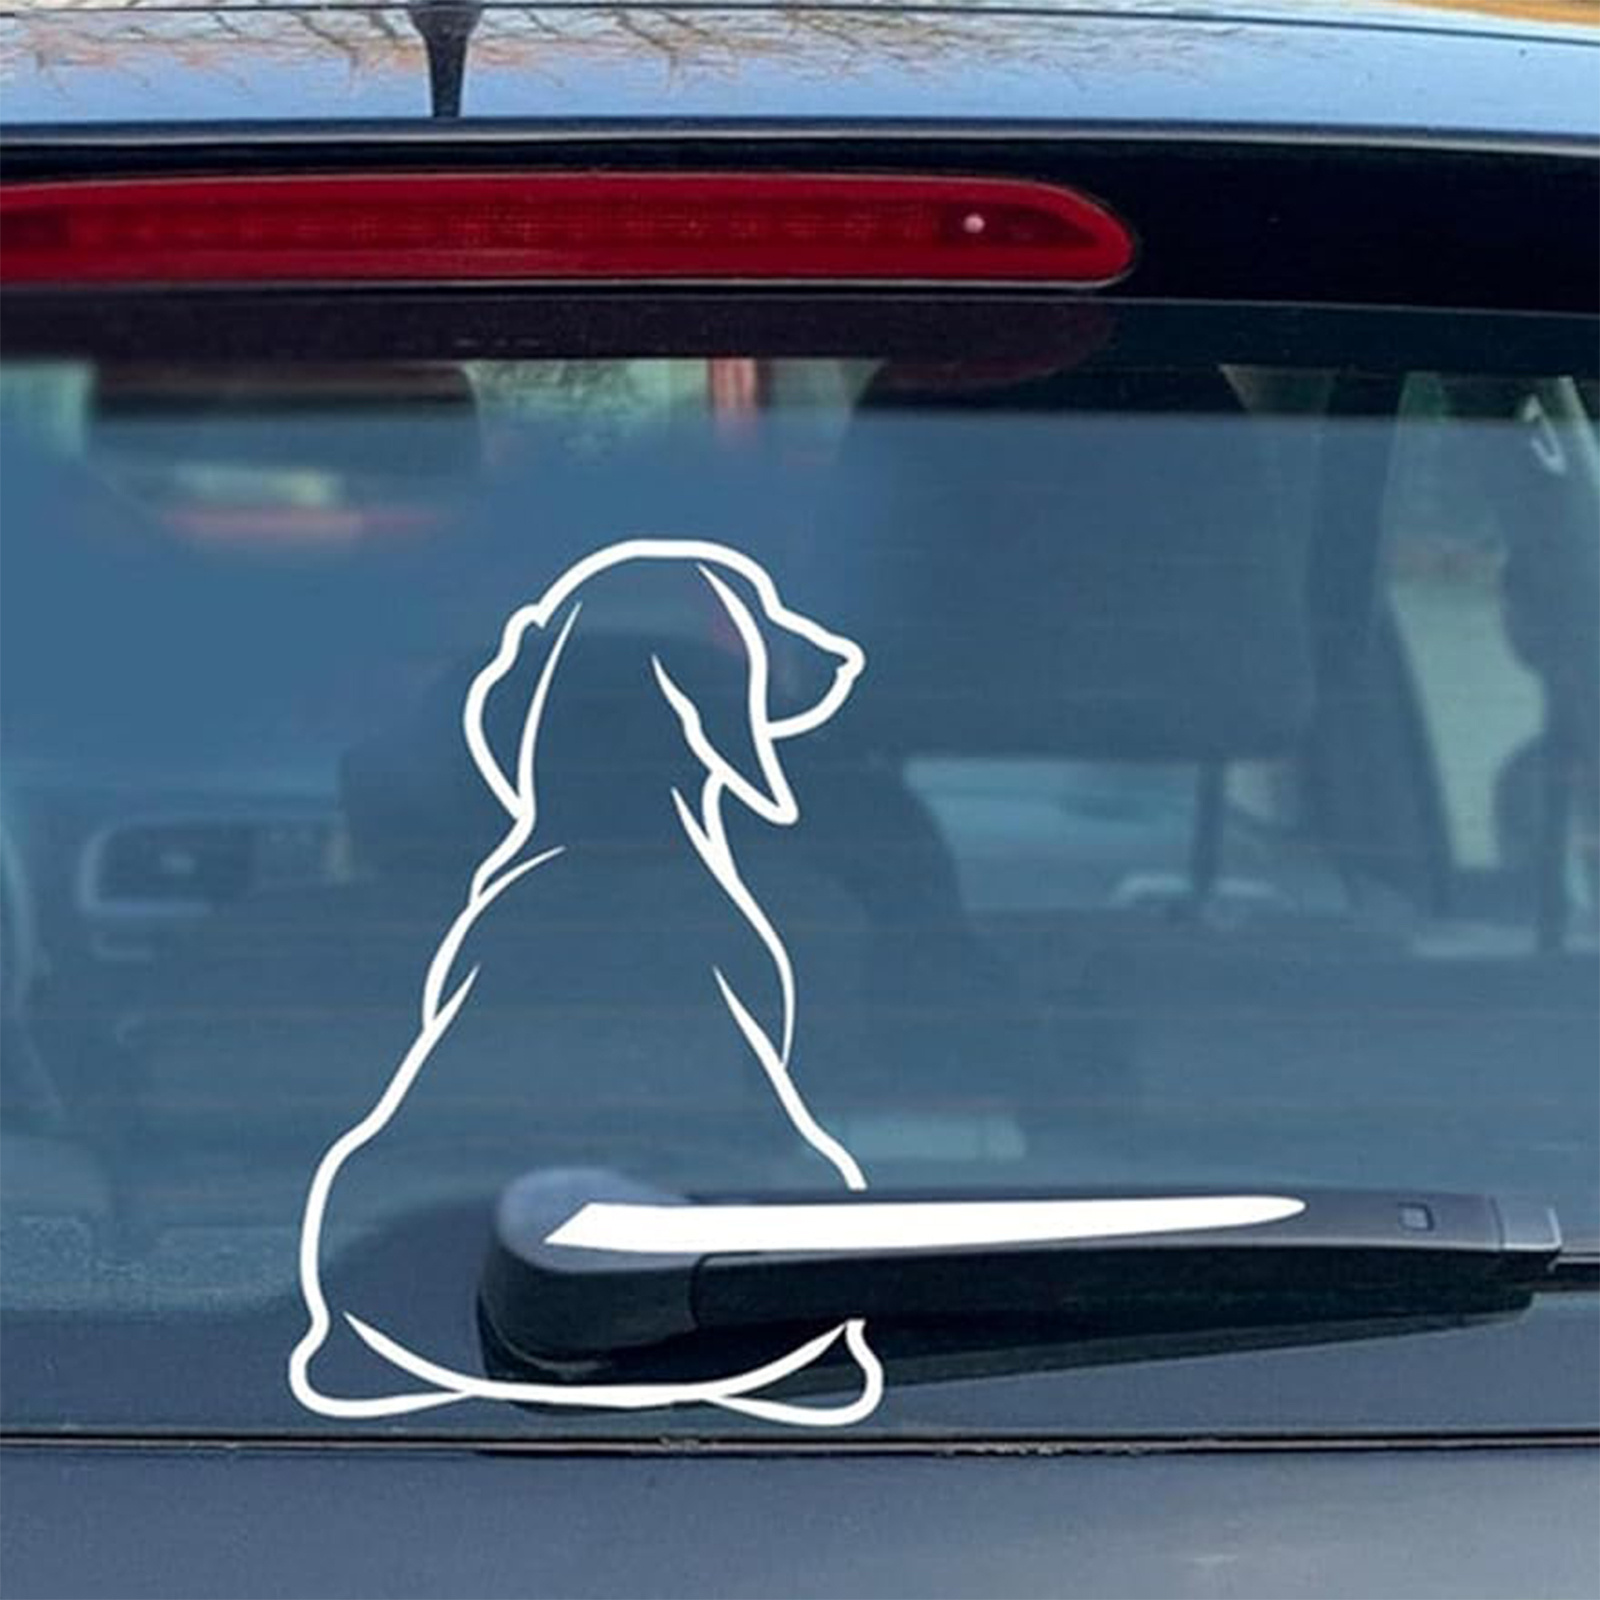 

White Funny Dog Moving Tail Decal Dog Windshield Wiper Sticker Cute Animal Puppy Car Sticker Waterproof Rear Window Wiper Decal Decoration